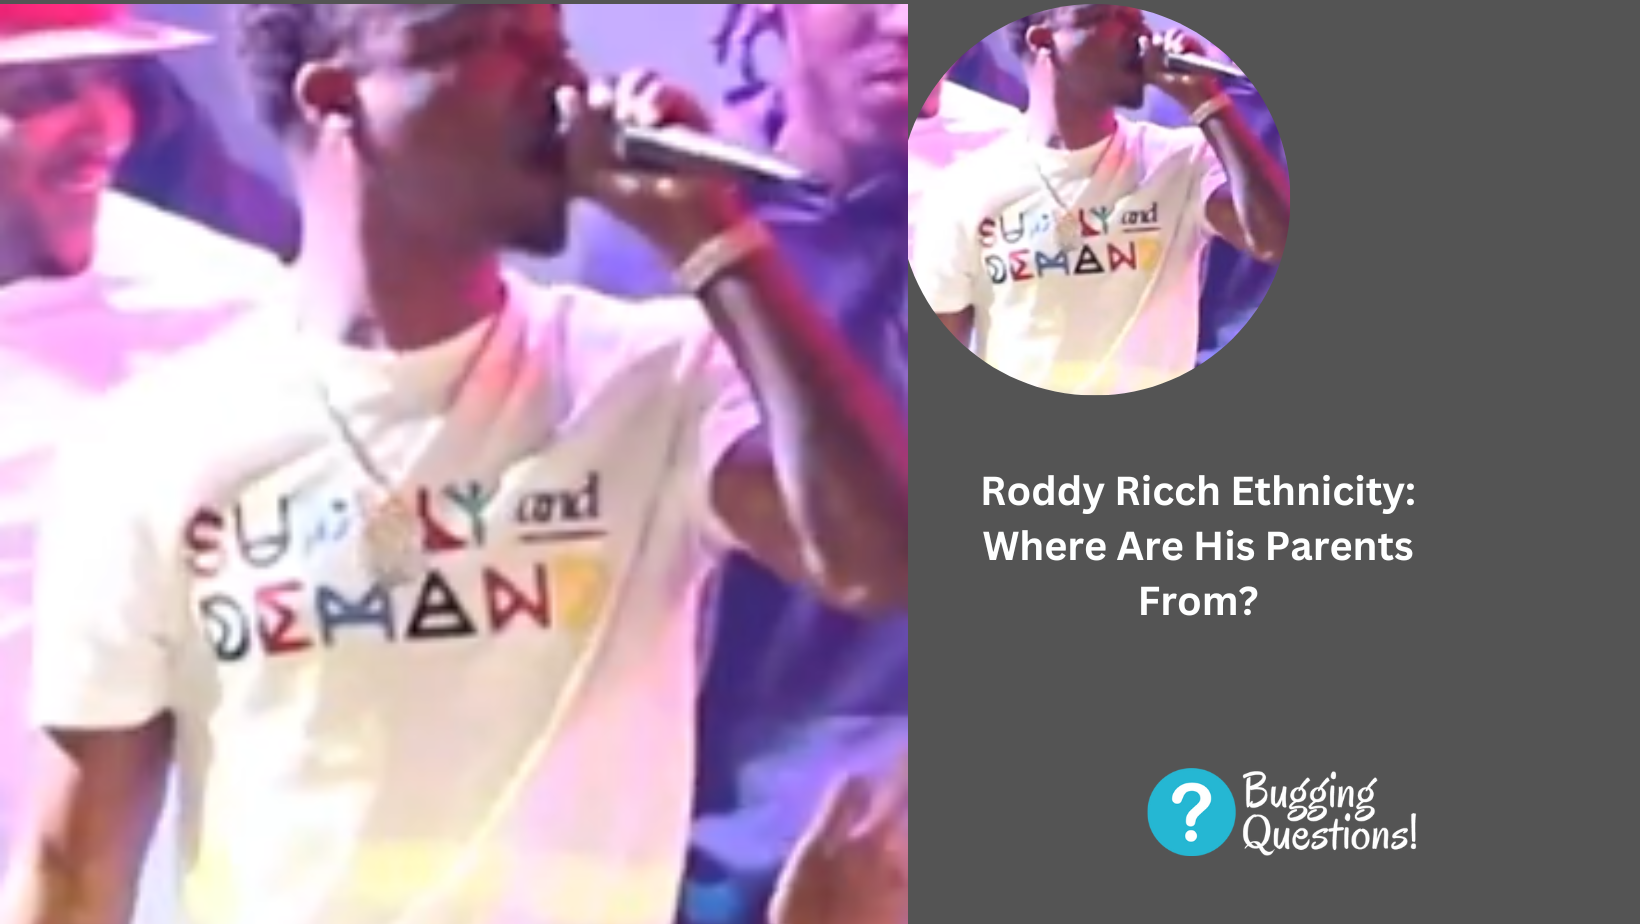 Roddy Ricch Ethnicity: Where Are His Parents From?